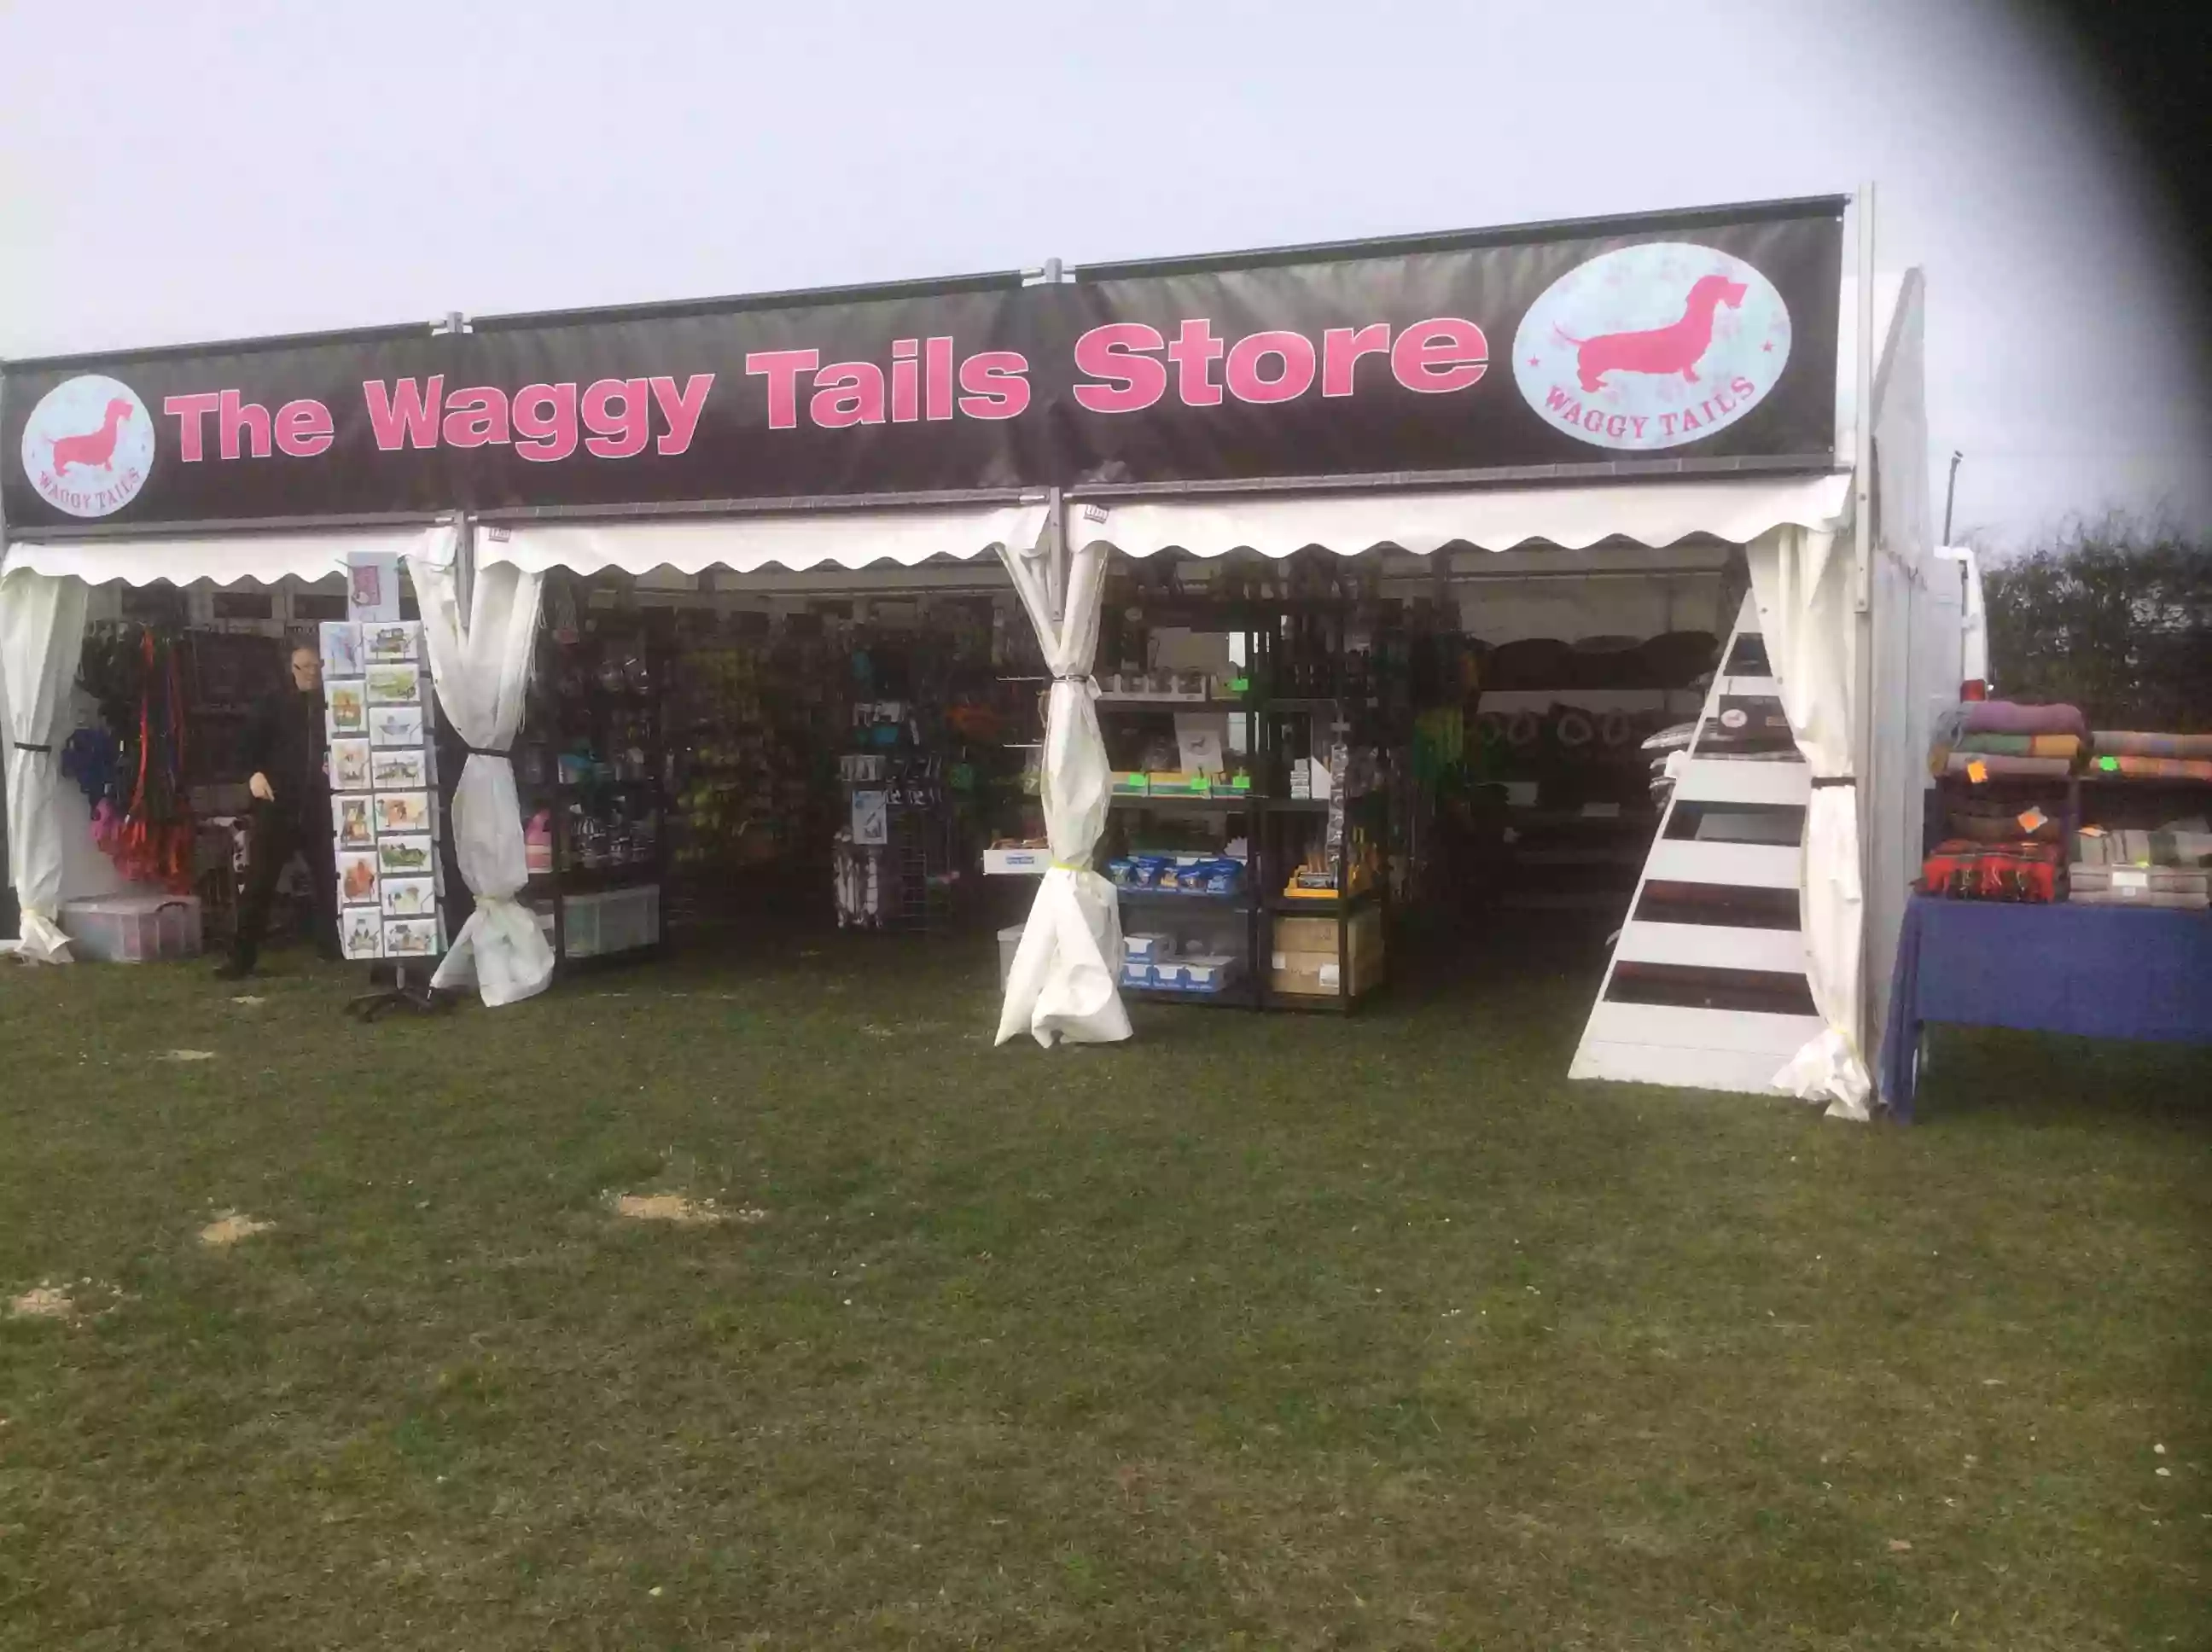 The Waggy Tails Store